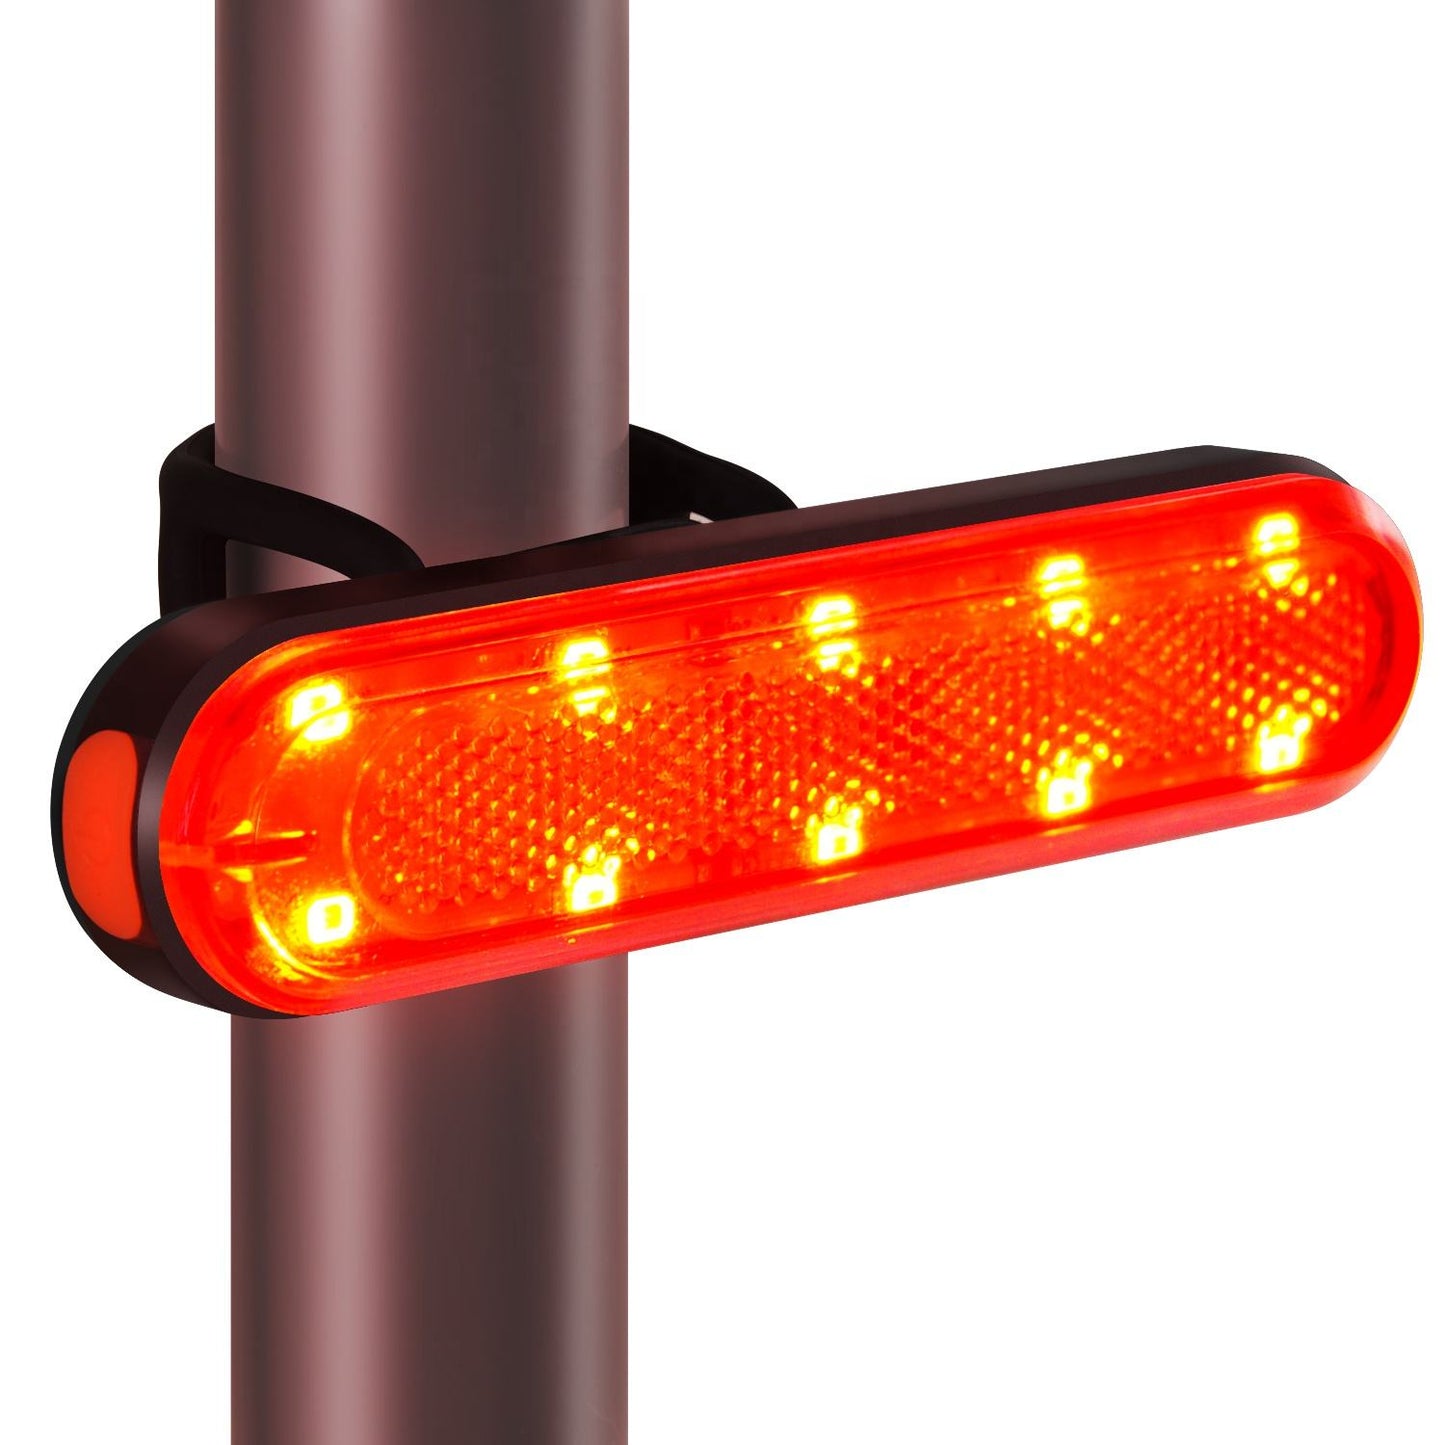 Bicycle tail lamp with 10 lamp beads